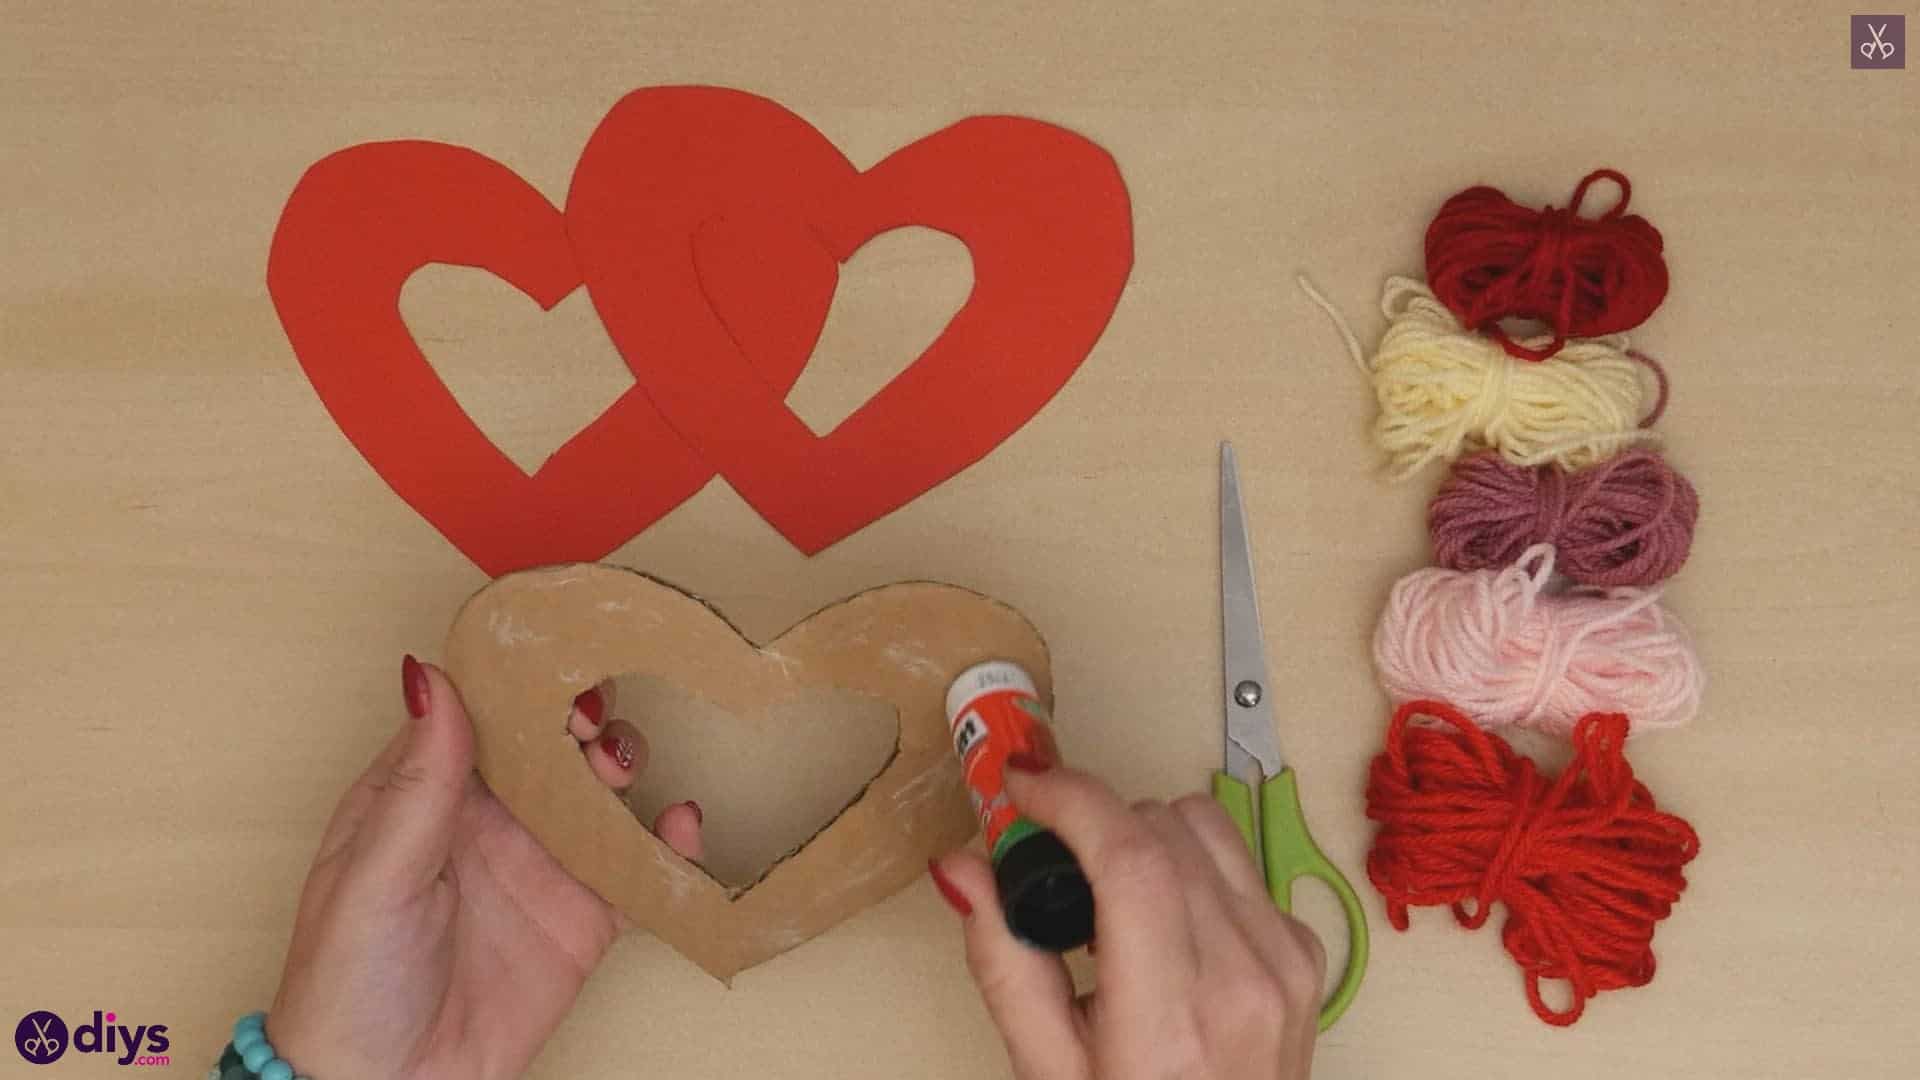 Diy yarn wrapped paper heart step 4